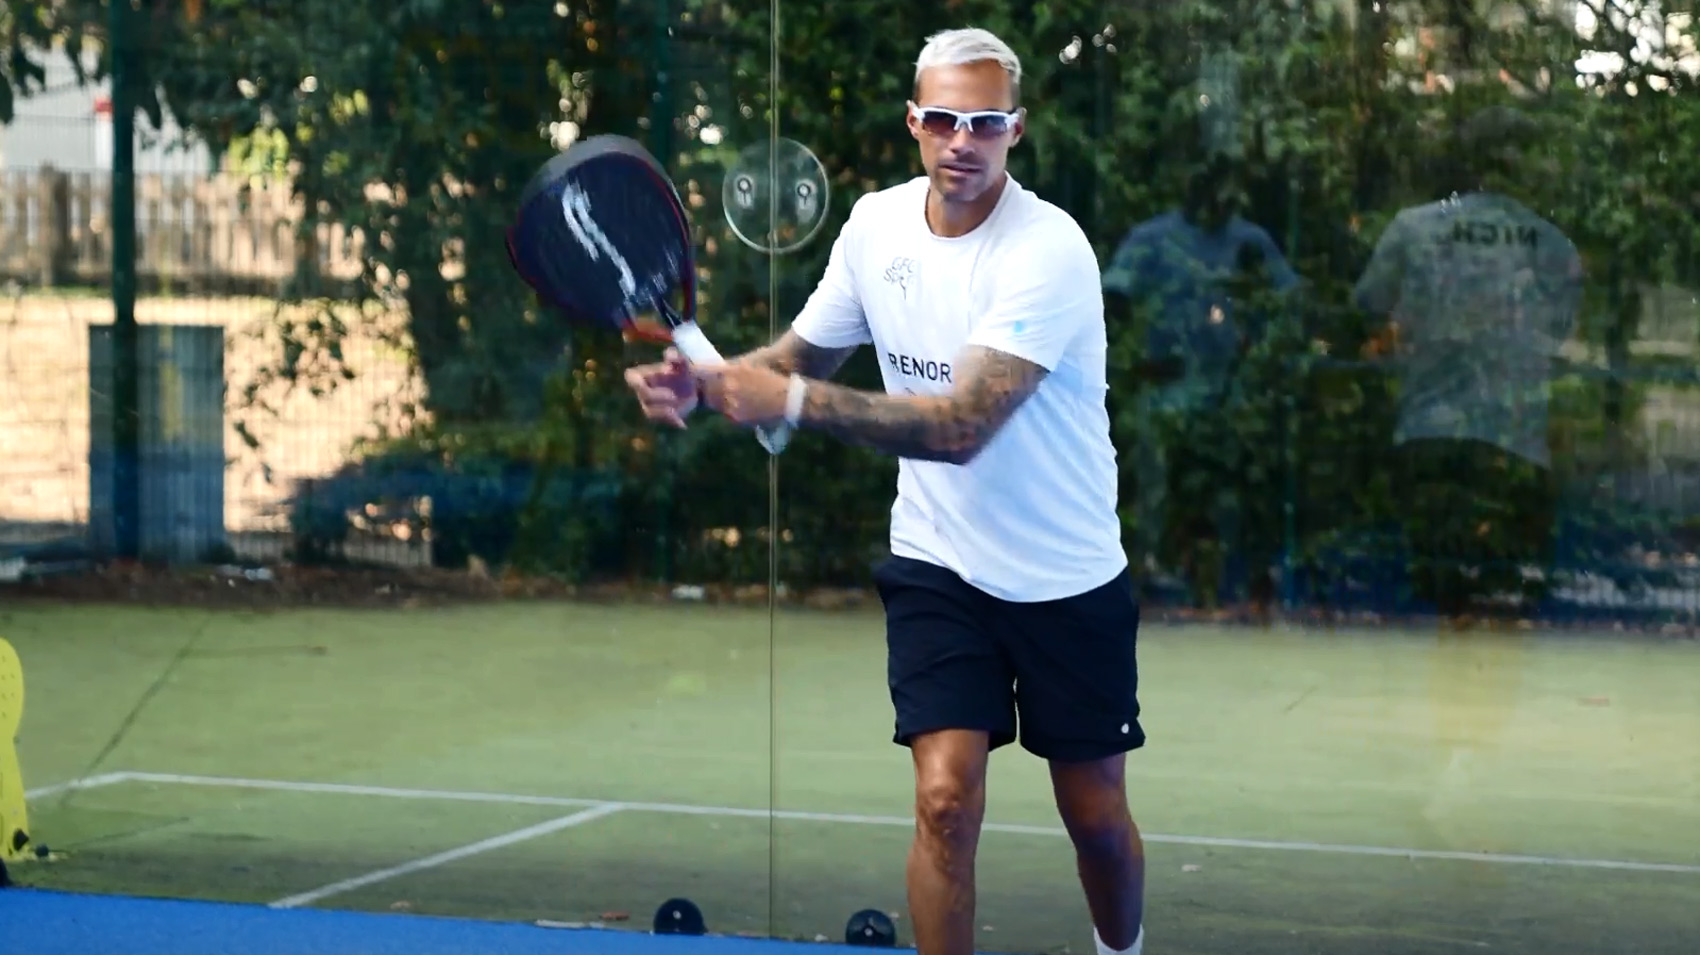 Padel, the 3 most common mistakes to avoid - Video